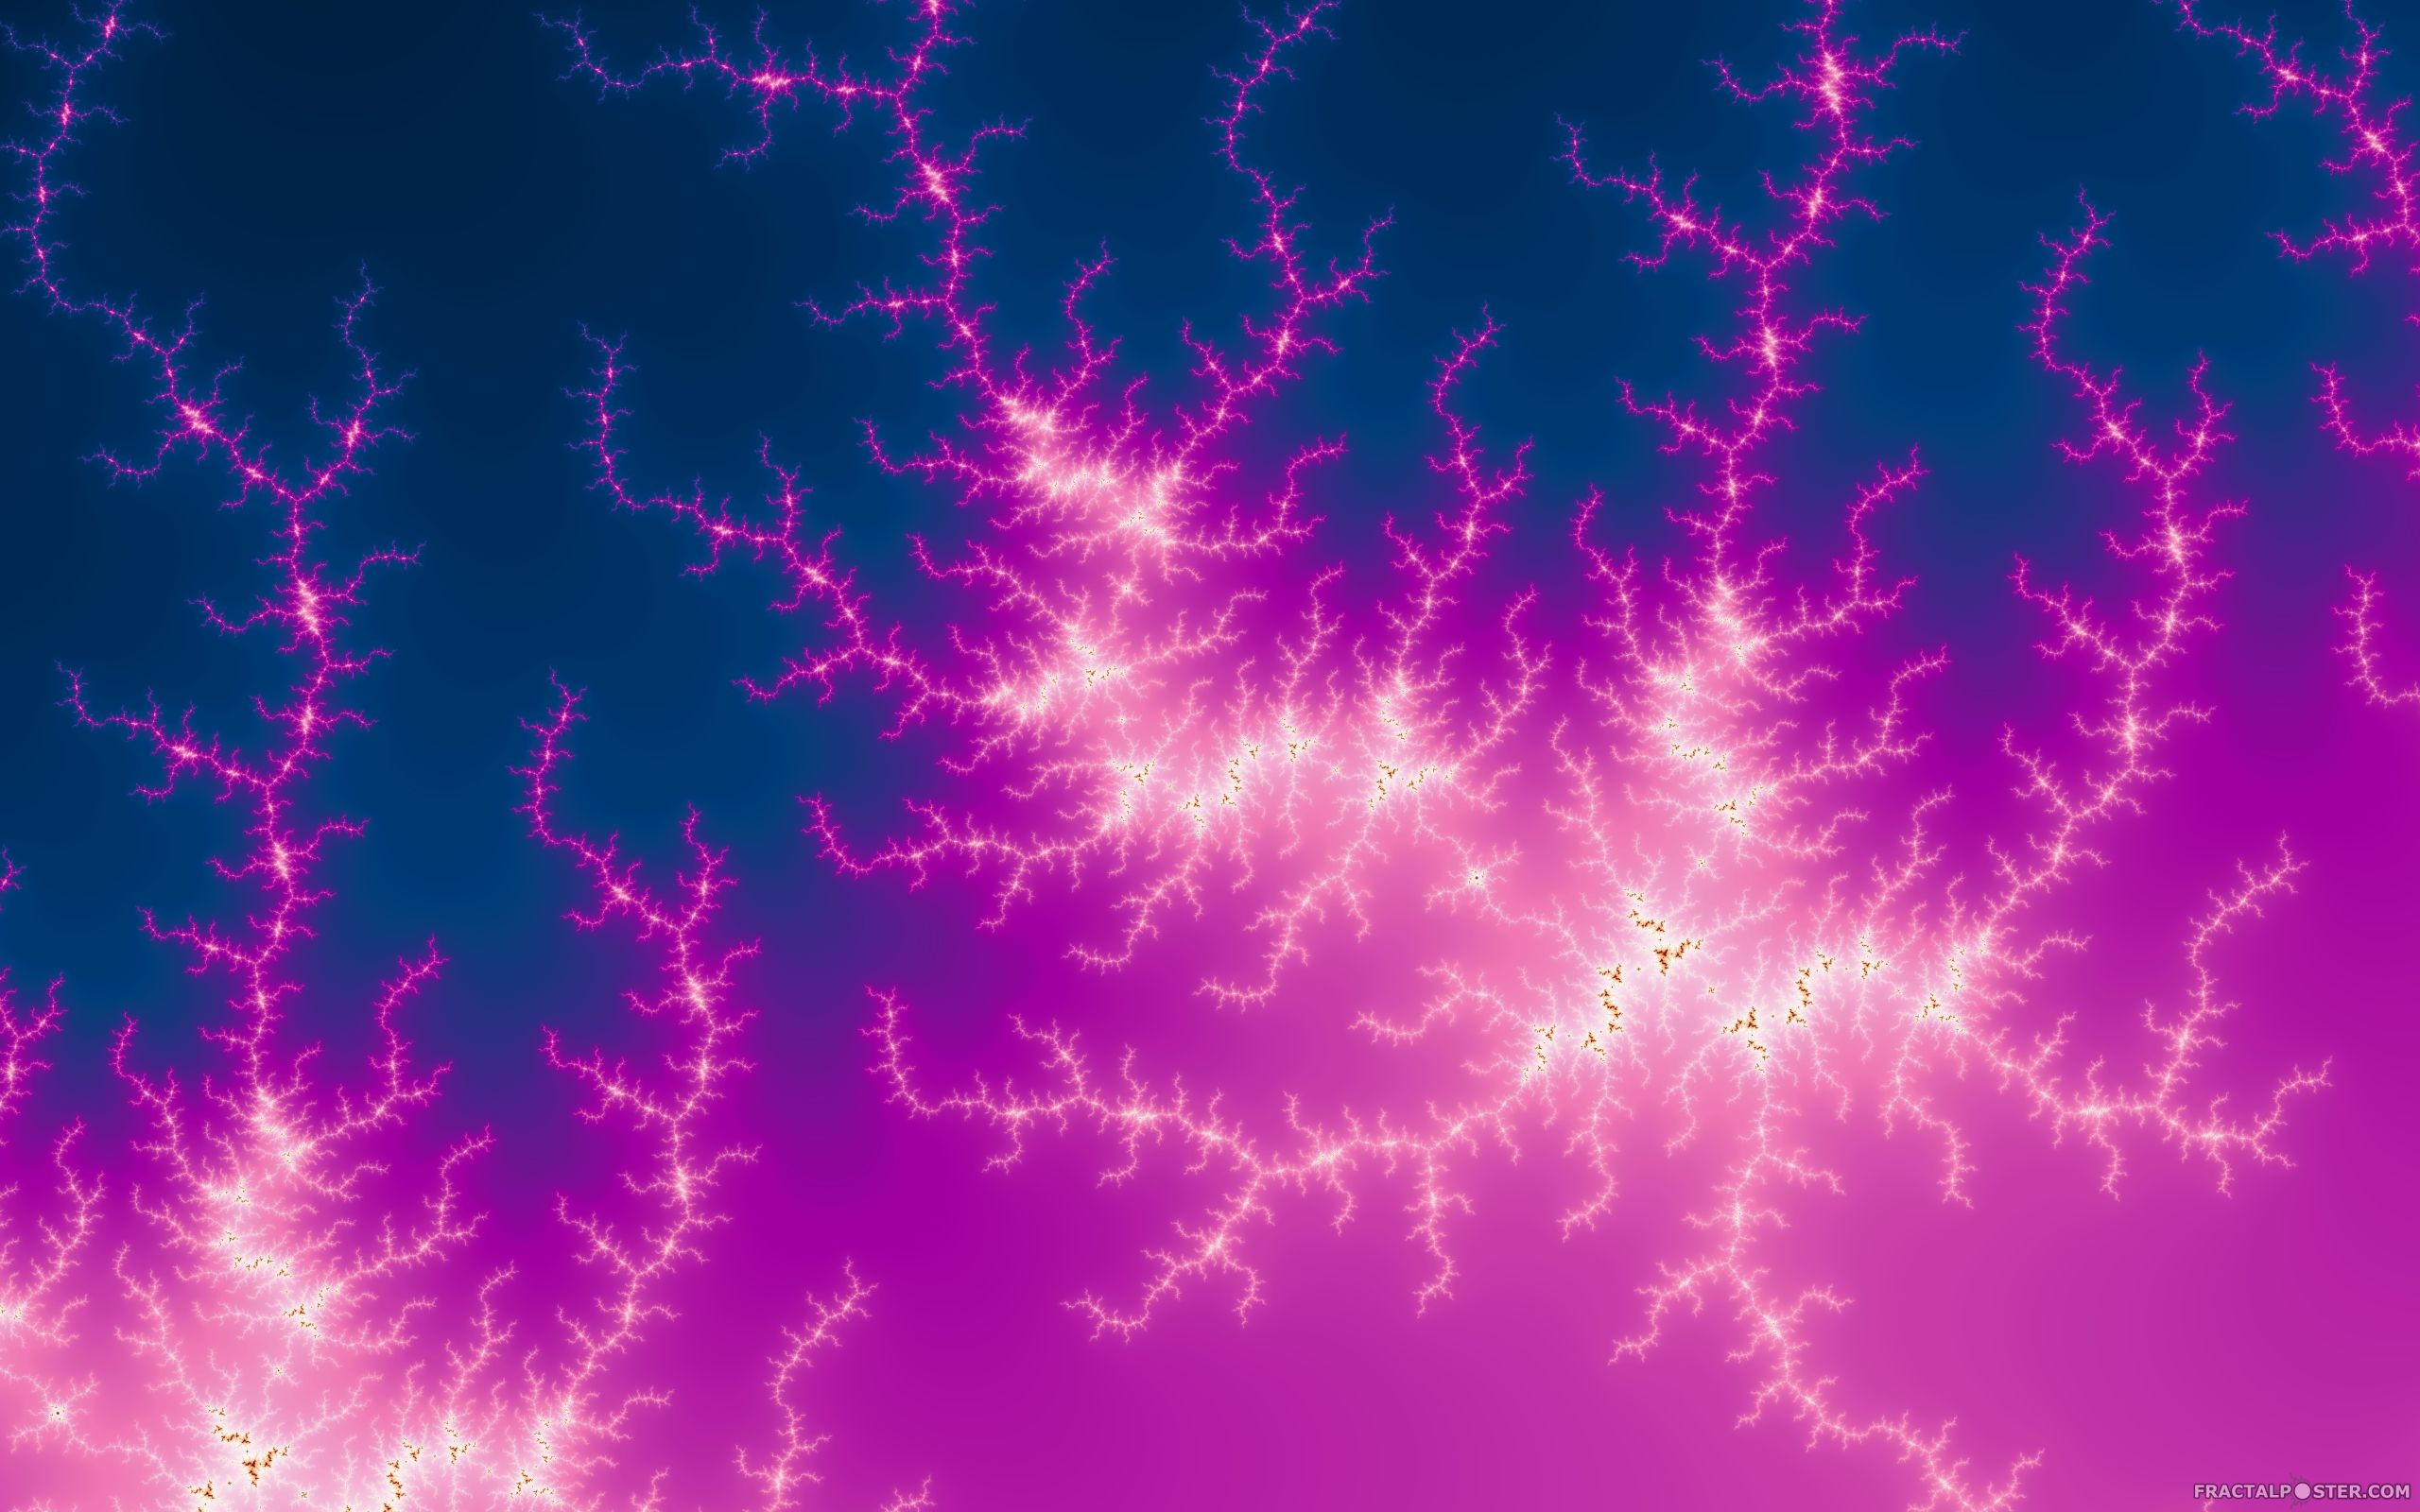 Light it up fractal image by Spac3case. HD Wallpaper, posters